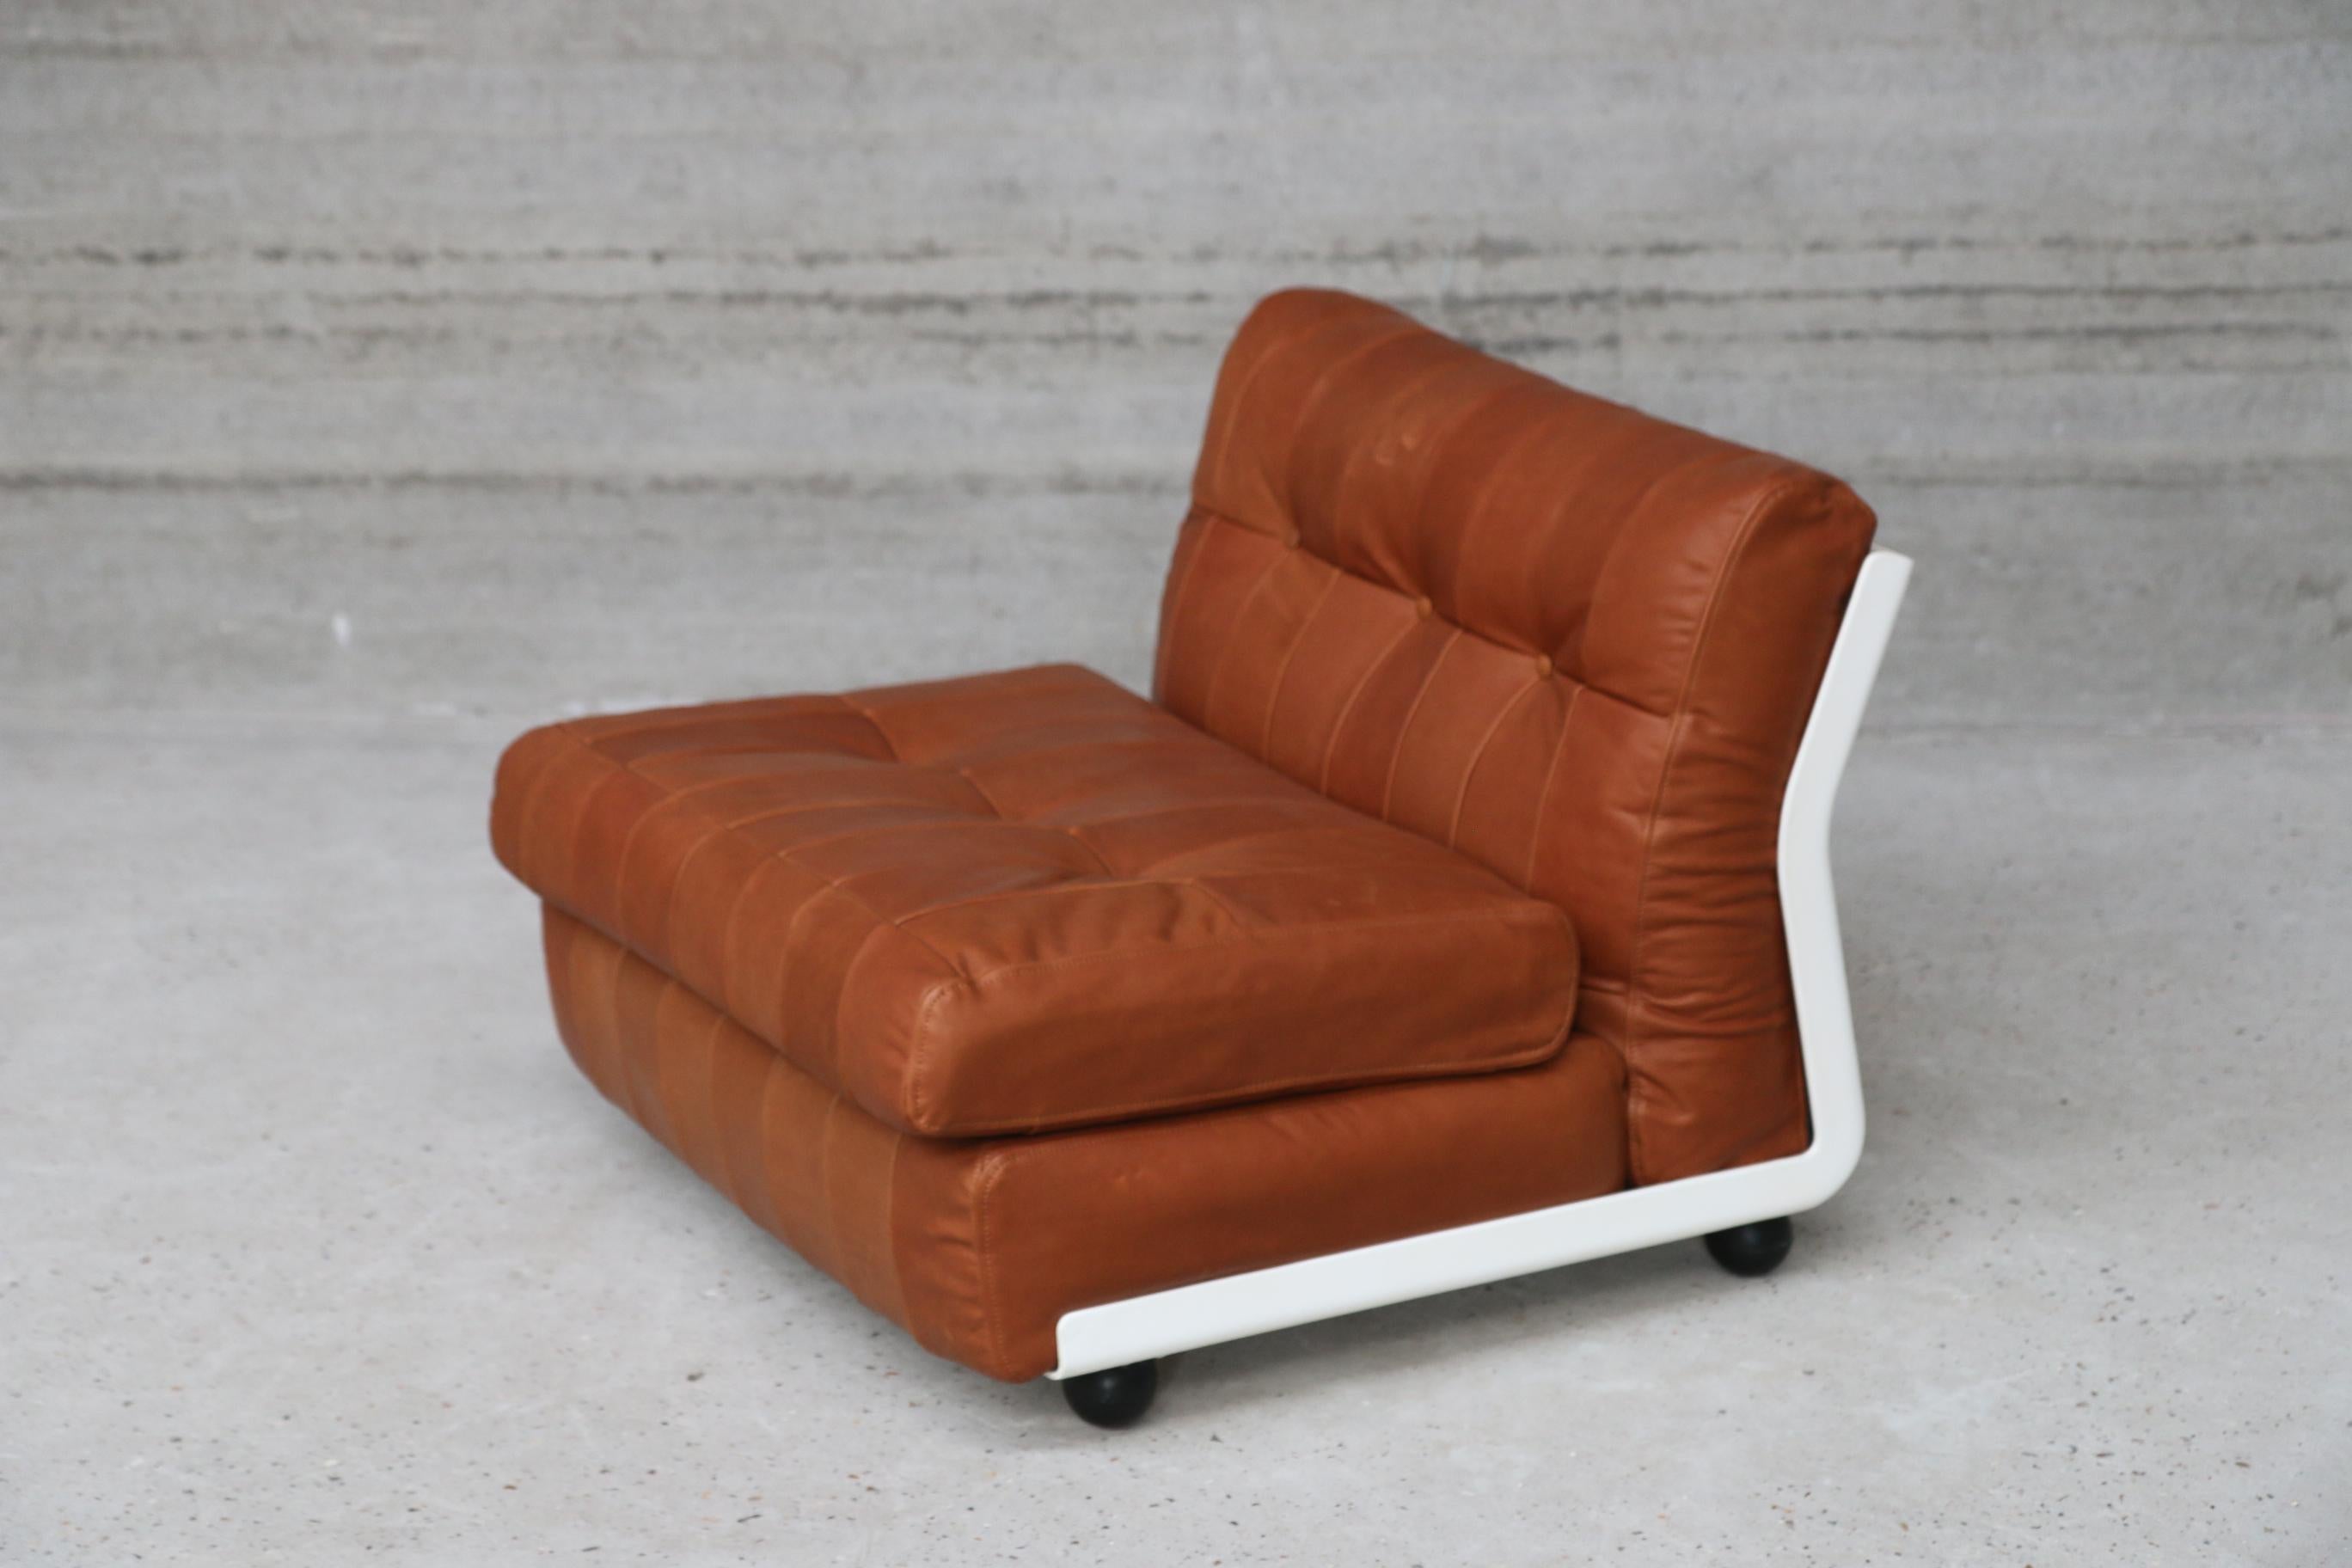 Vintage signed and stamped B&B Italia Mario Bellilni. Bellalu upholstered this midcentury design gem with their signature unique natural vegetal tainted aniline full grain leather. We gave the design a twist by using a patchwork leather upholstery